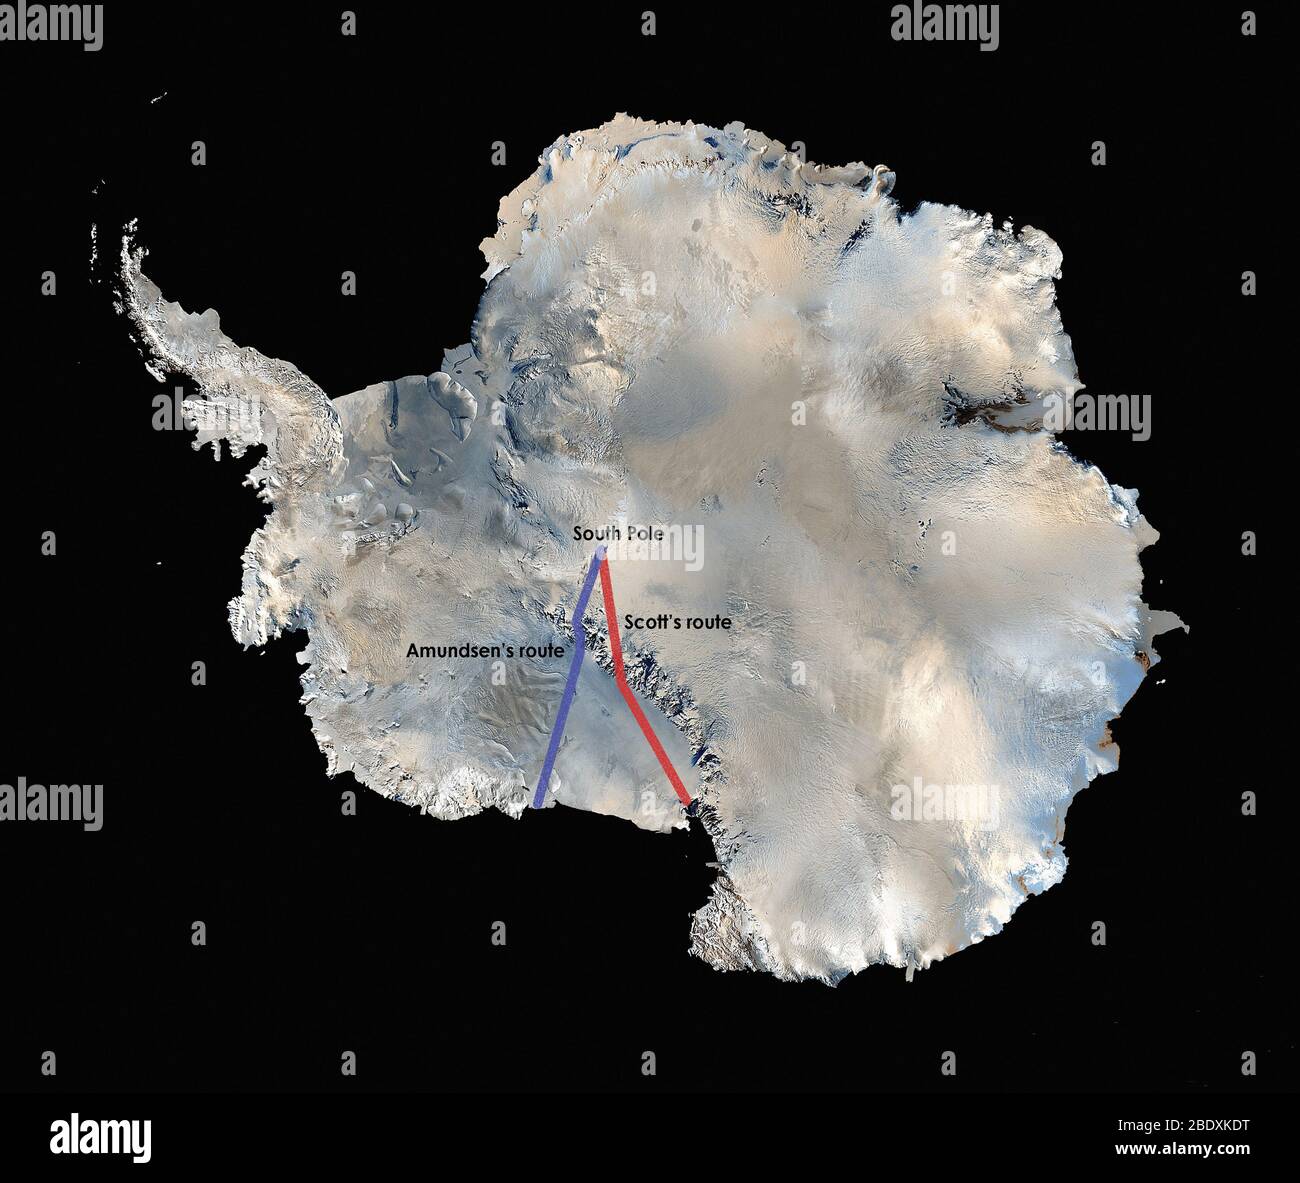 The world's first high resolution, three-dimensional, true-color map of Antarctica was built from more than 1,100 images from the Landsat 7 satellite. To create the Landsat Image Mosaic of Antarctica (LIMA), scientific visualizers combined Landsat 7 scenes (acquired between 1999 and 2001), a digital elevation model, and field data measurements. It took years to stitch the whole thing together for release in 2007. NASA worked with the USGS, the National Science Foundation, and the British Antarctic Survey to create the map of the highest, driest, coldest, windiest, and brightest of Earth's seve Stock Photo